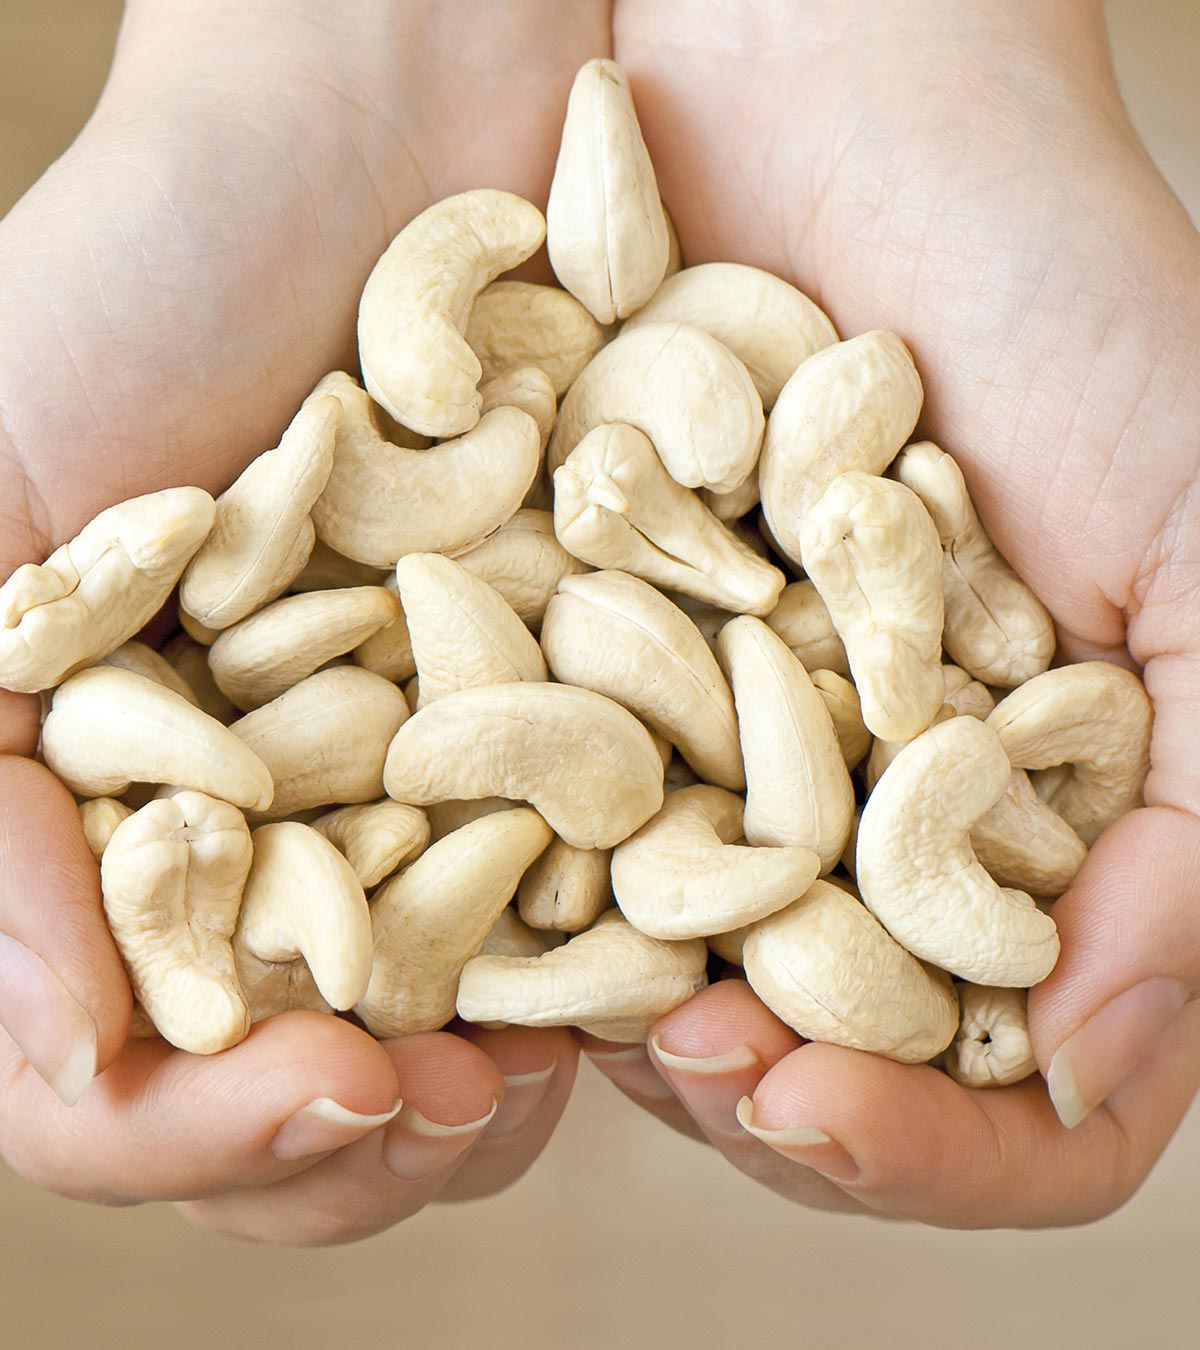 Beak very Overwhelm 11 Science-Backed Health Benefits Of Cashew Nuts In Pregnancy